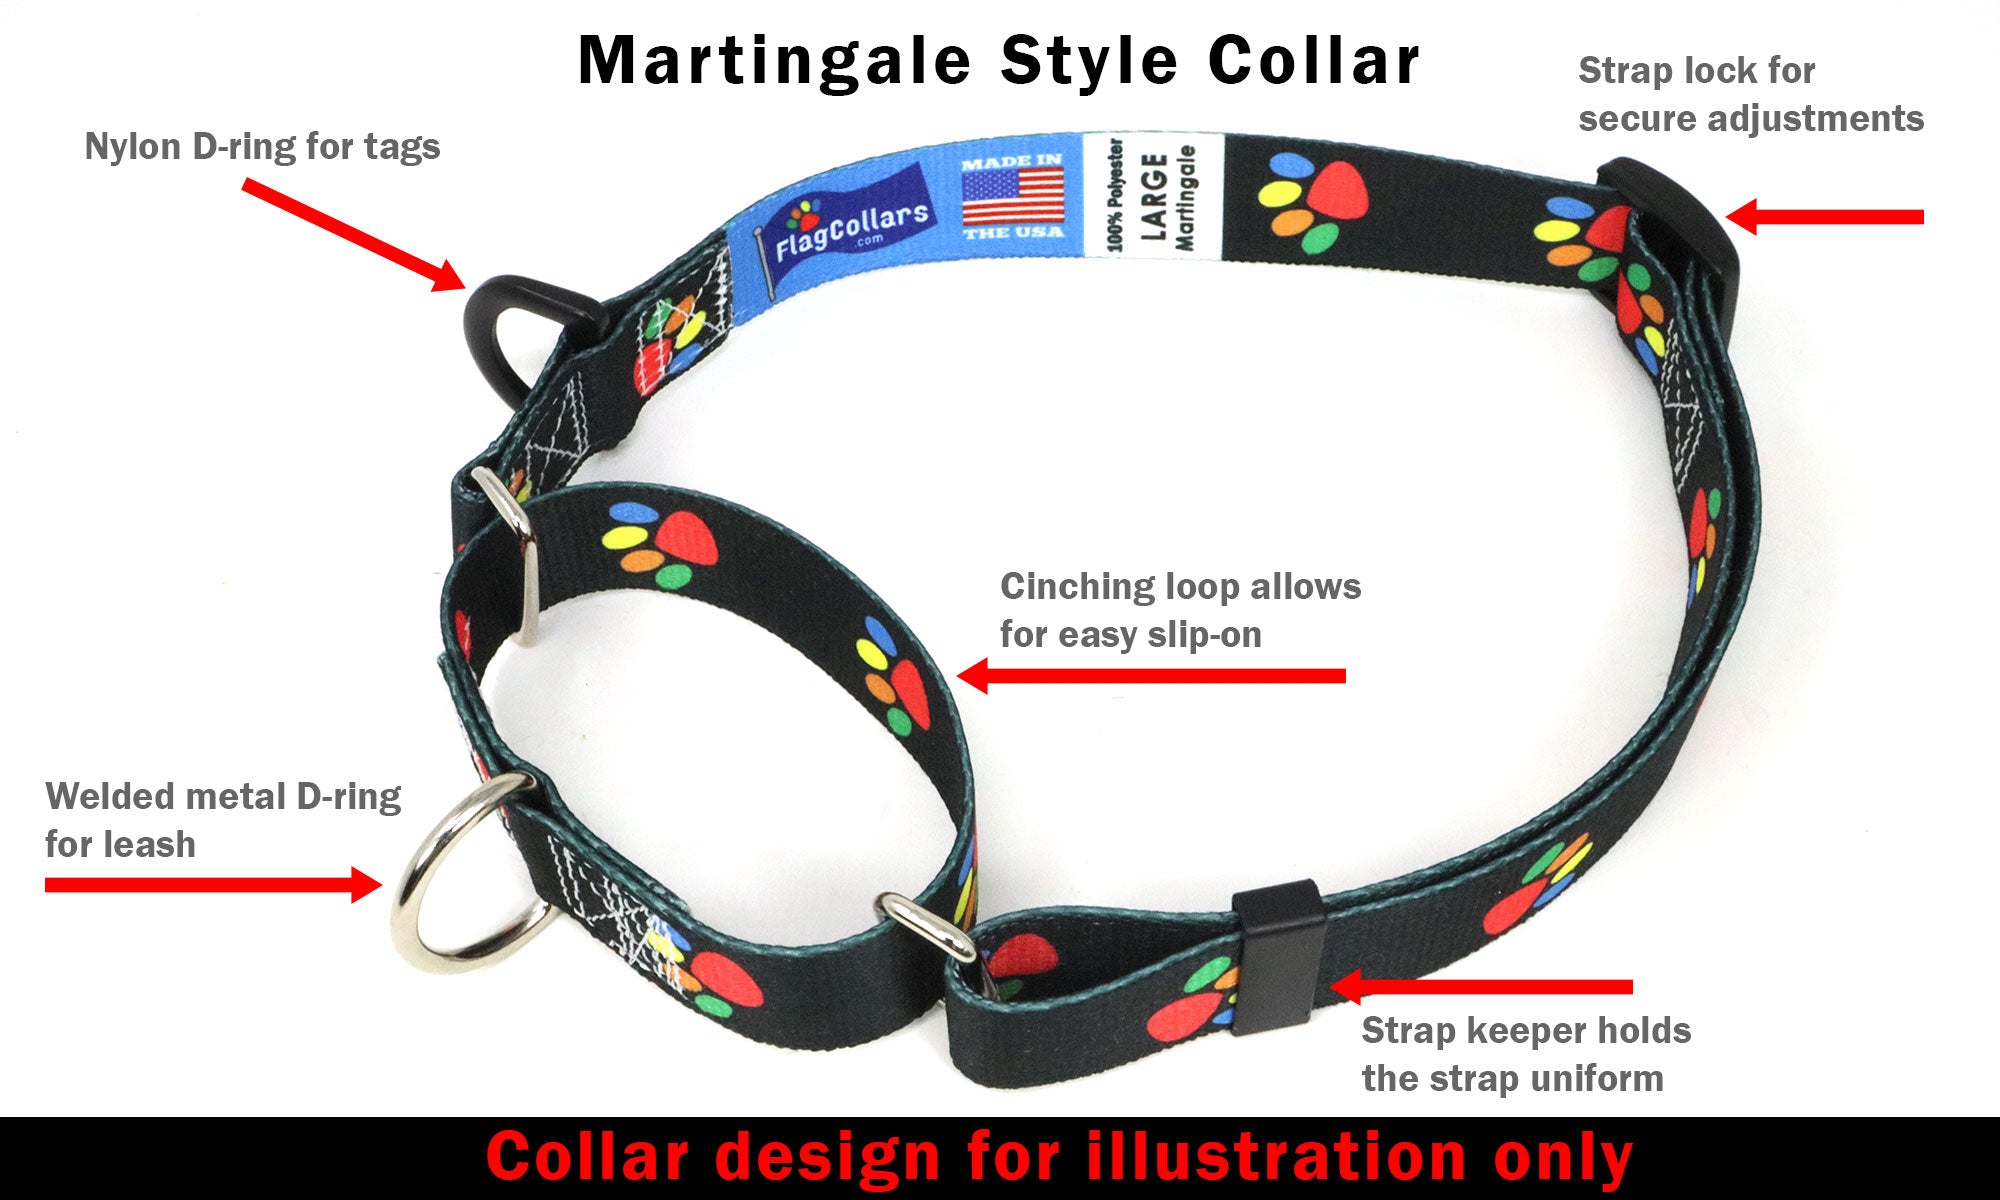 Malawi Dog Collar for Soccer Fans | Black or Pink | Quick Release or Martingale Style | Made in NJ, USA